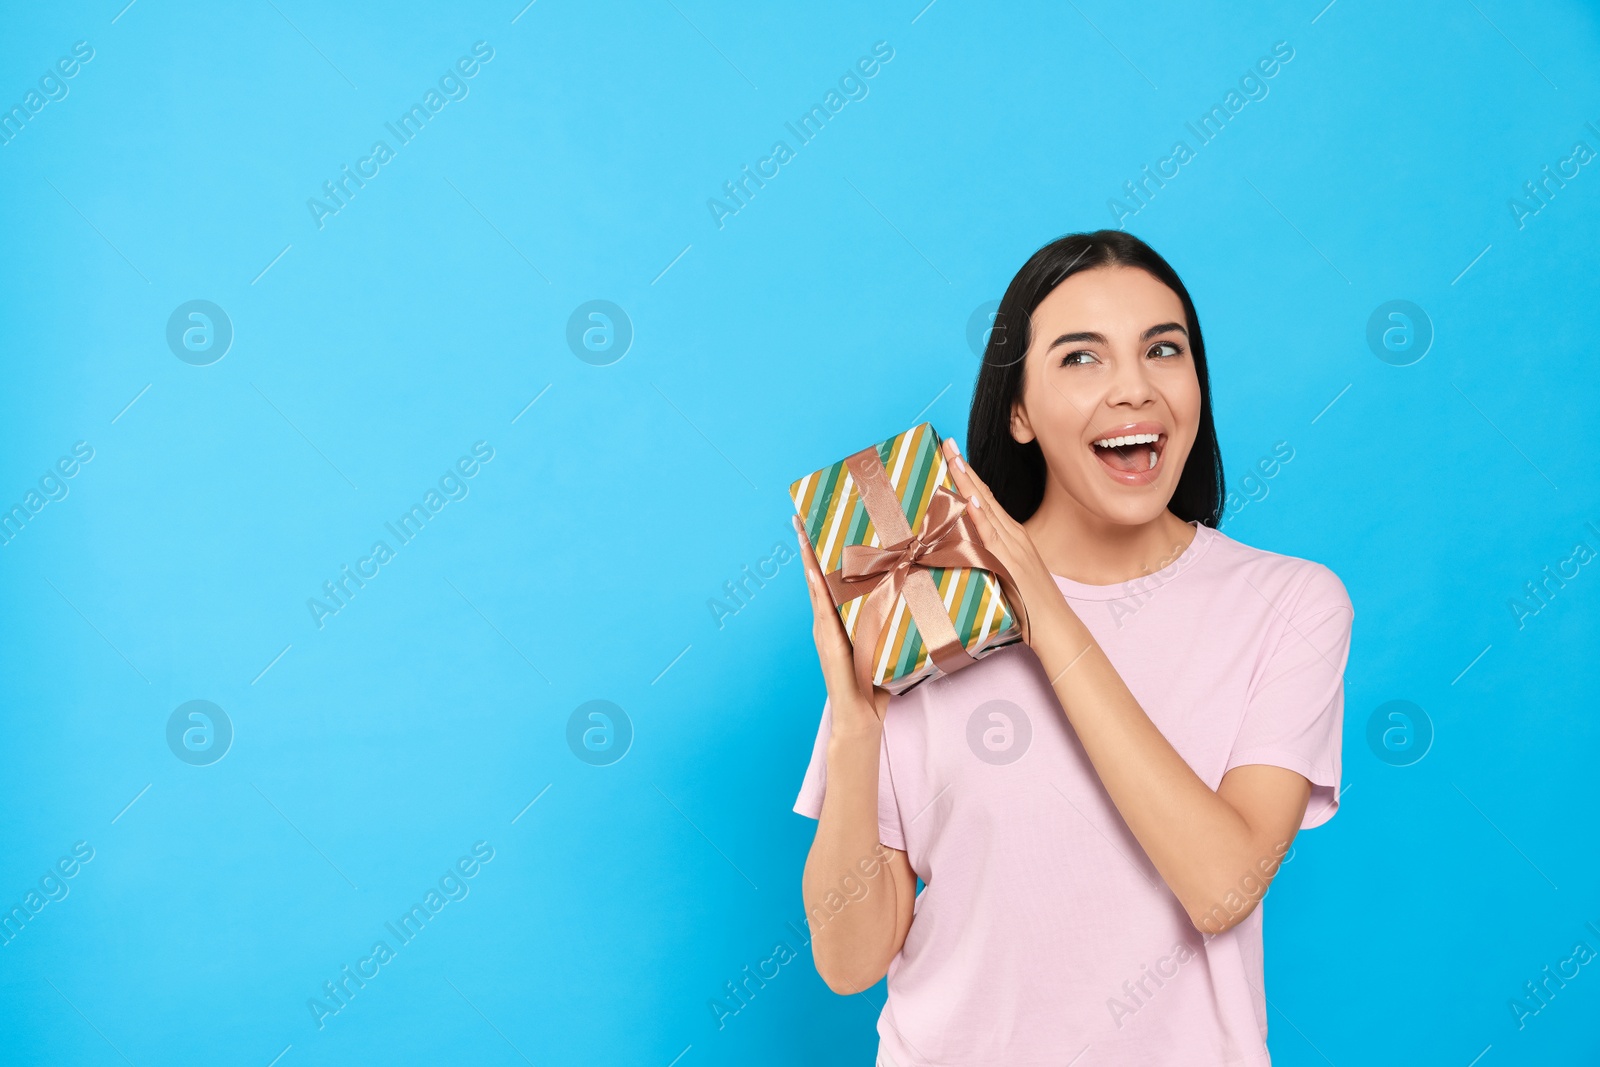 Photo of Emotional young woman holding gift box on light blue background, space for text